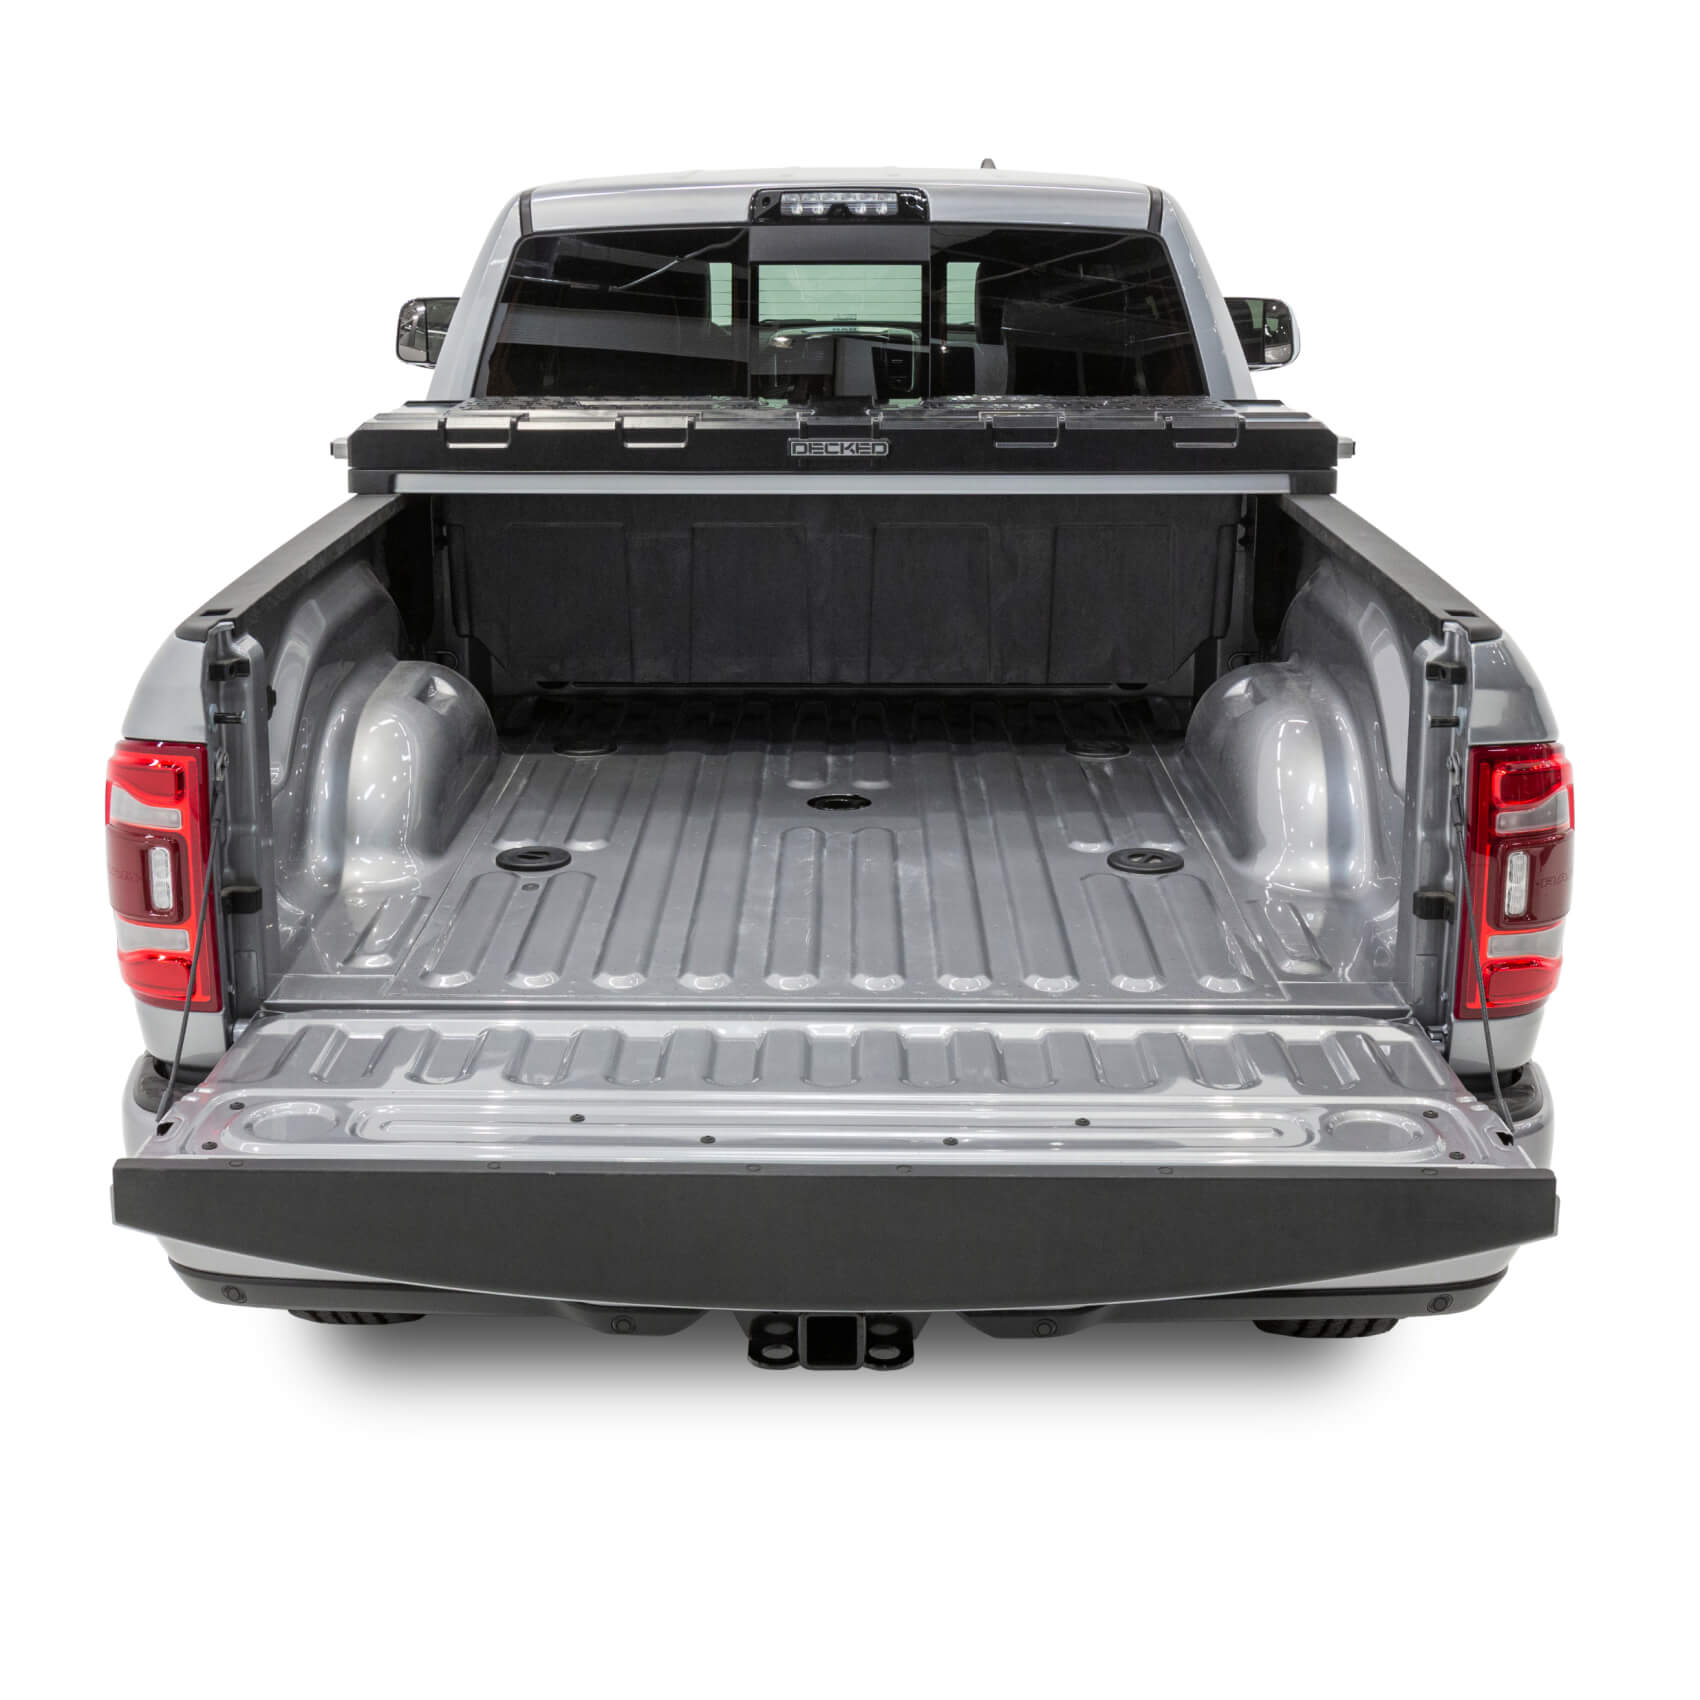 Finishline Auto Salon - Get Decked! Best bed storage system for your truck.  Whatever your use is, work, hunting, fishing, sports, shopping, etc.  #FinishLineShop #Fleet #CommercialTruck #worktruck #toolboxes #fleettrucks  #strobelights #truckoutfitters